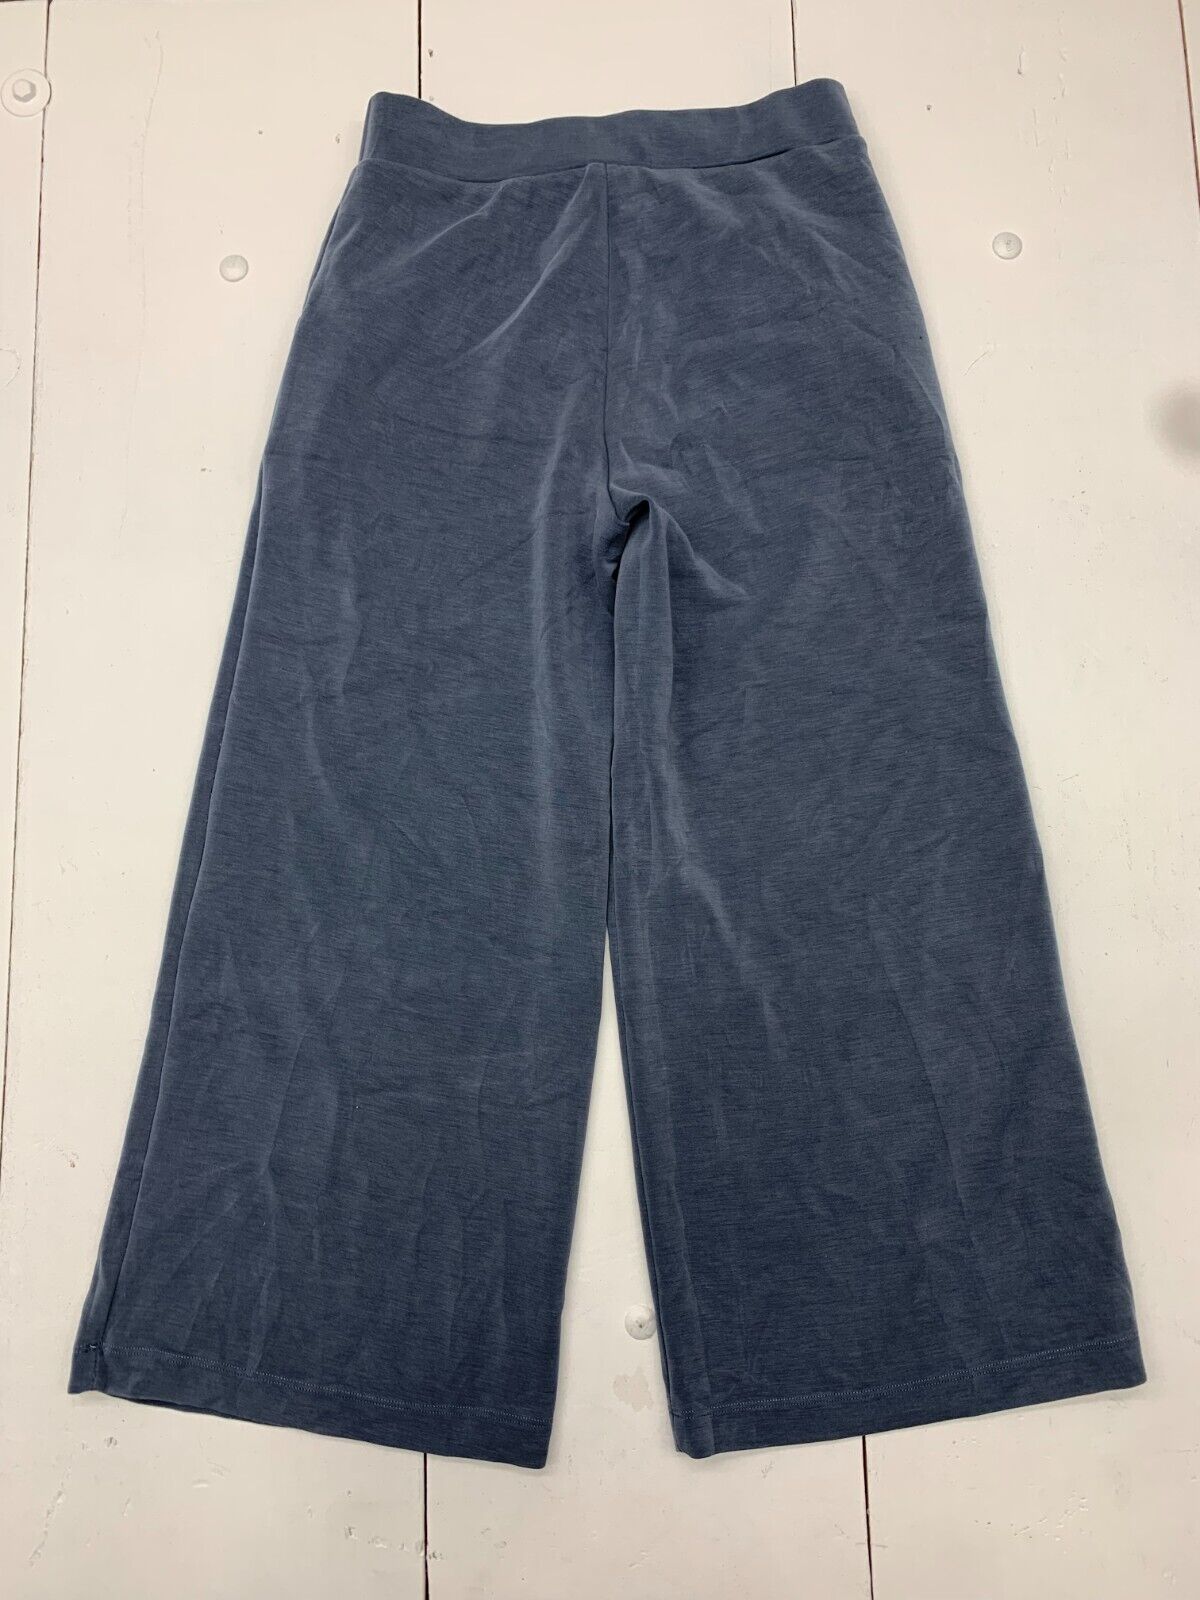 Cable & Gauge Sport Womens Blue/Gray Sweatpants Size Small